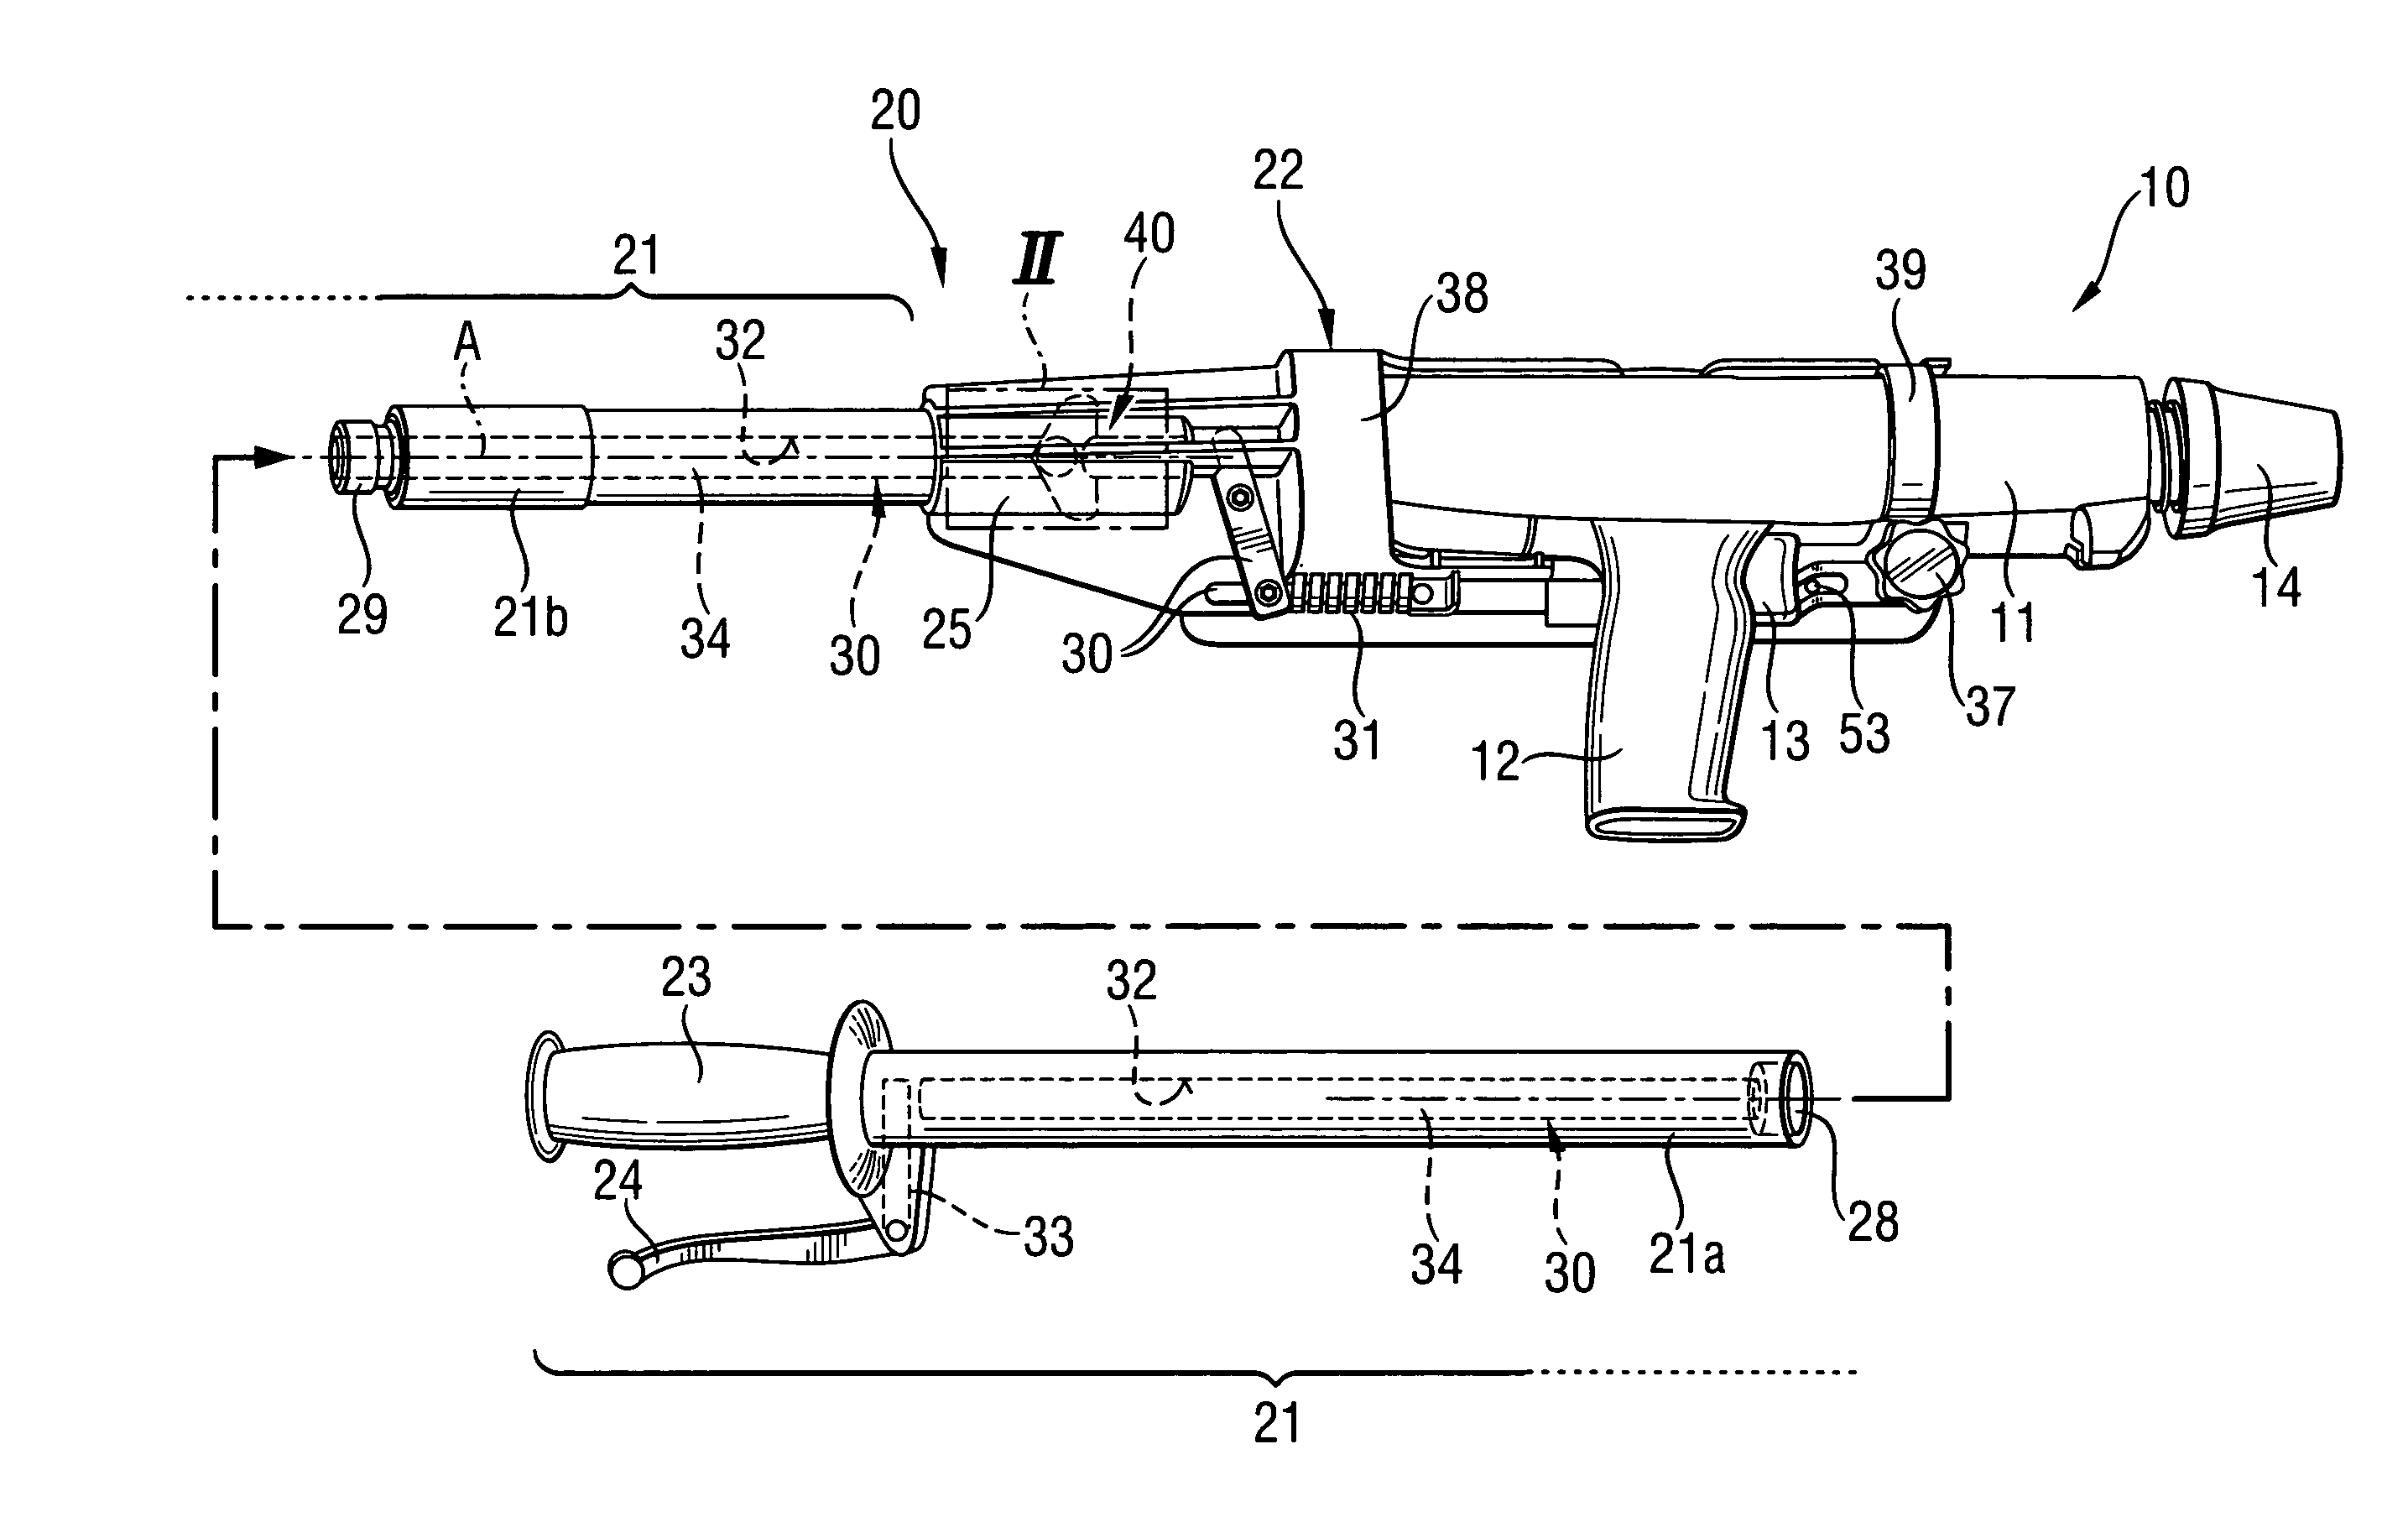 Positioning device with actuating switching means for a hand-held setting tool